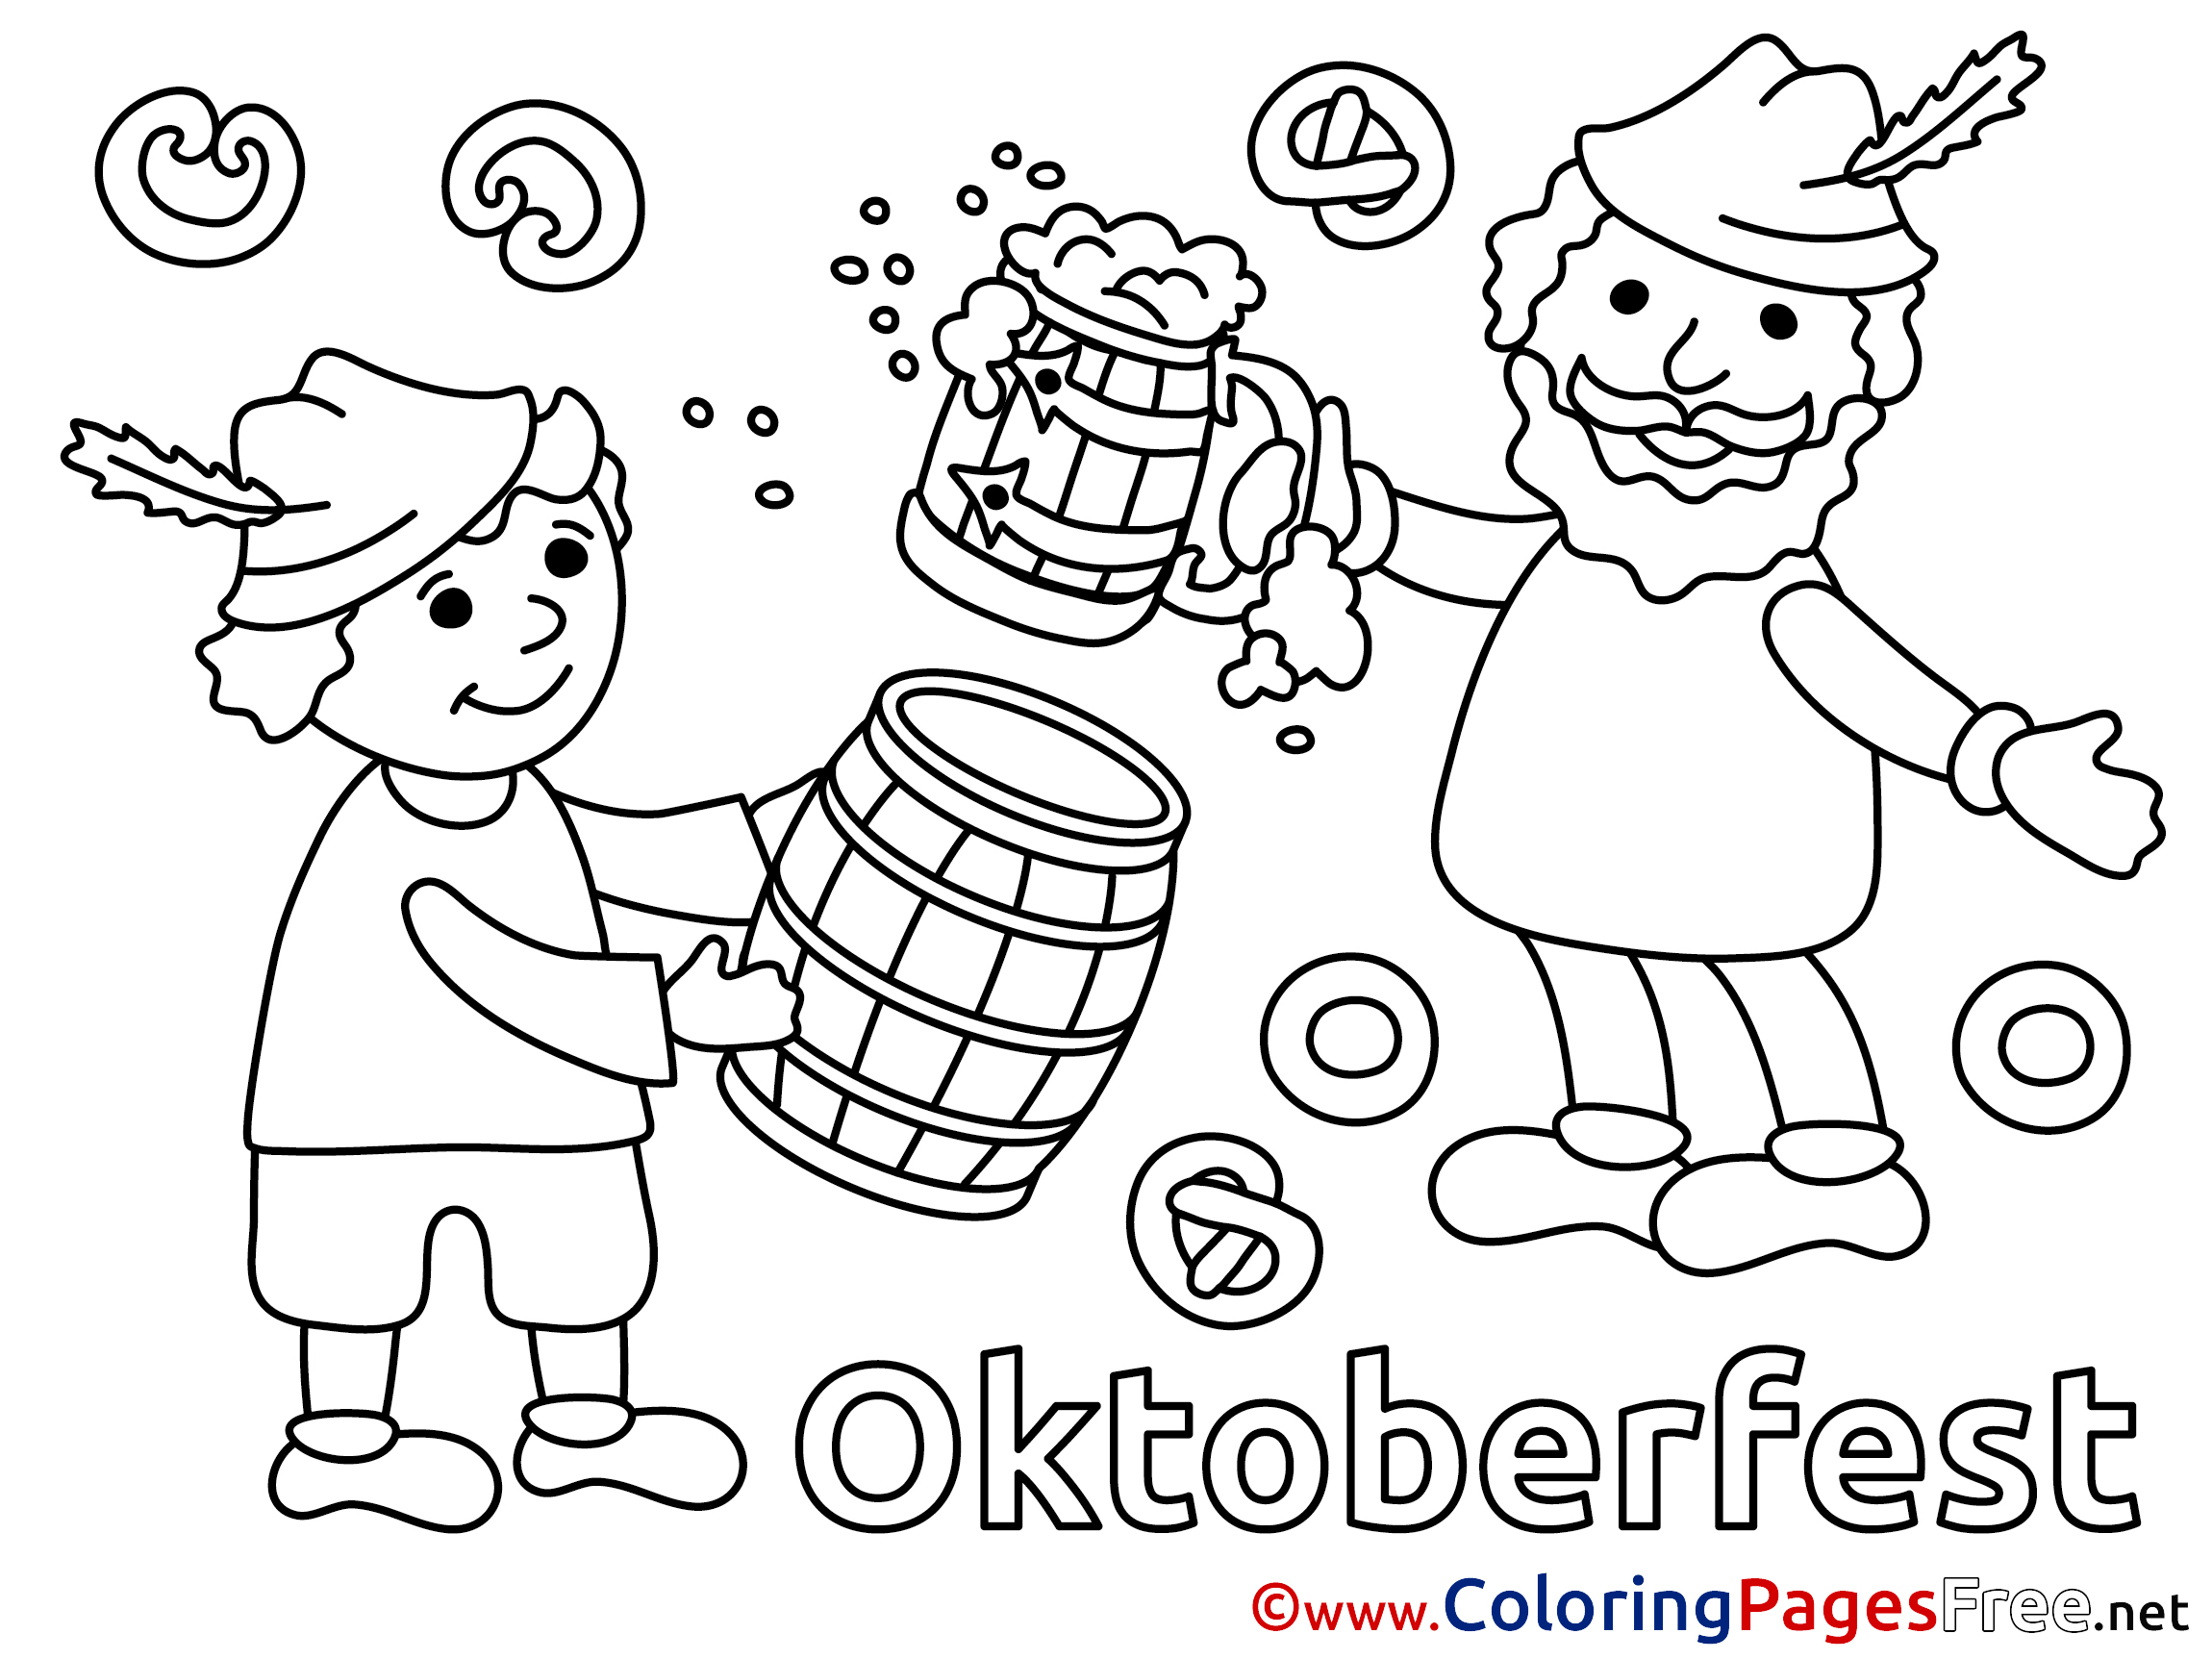 Beer Oktoberfest printable Coloring Pages for free